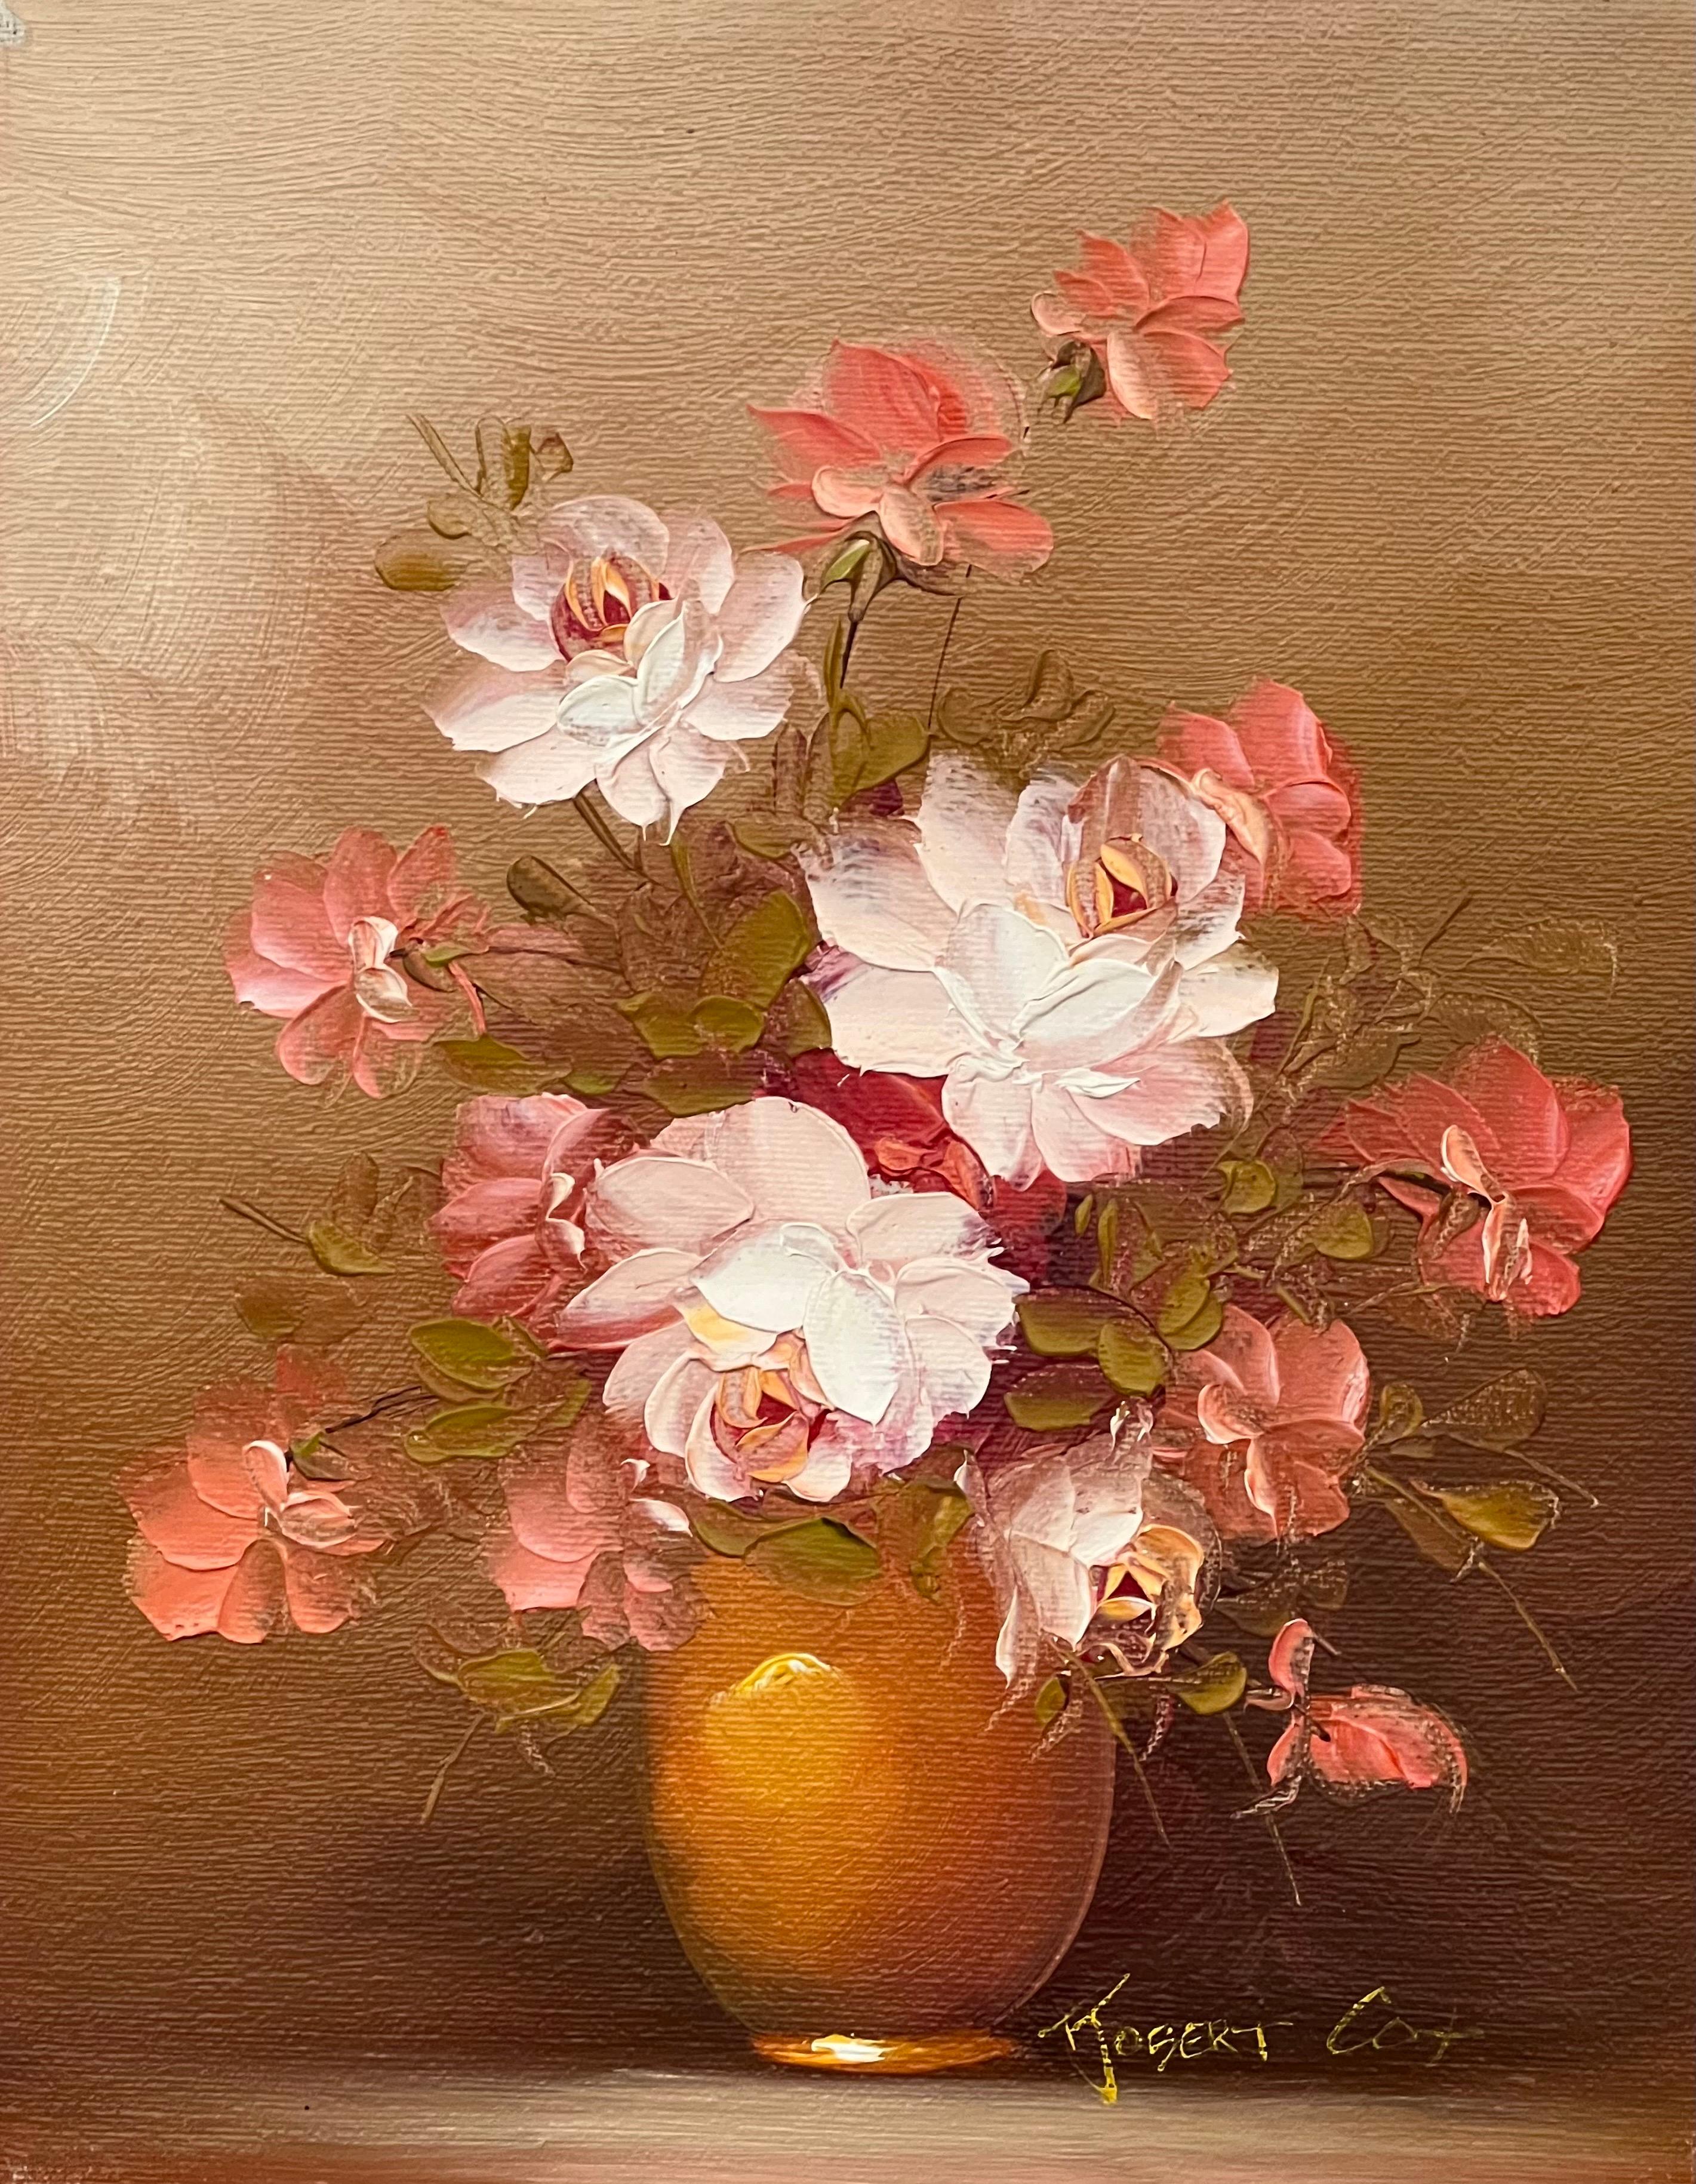 Robert Cox Interior Painting - Still Life of a Vase of Pink Red & White Roses by 20th Century American Artist